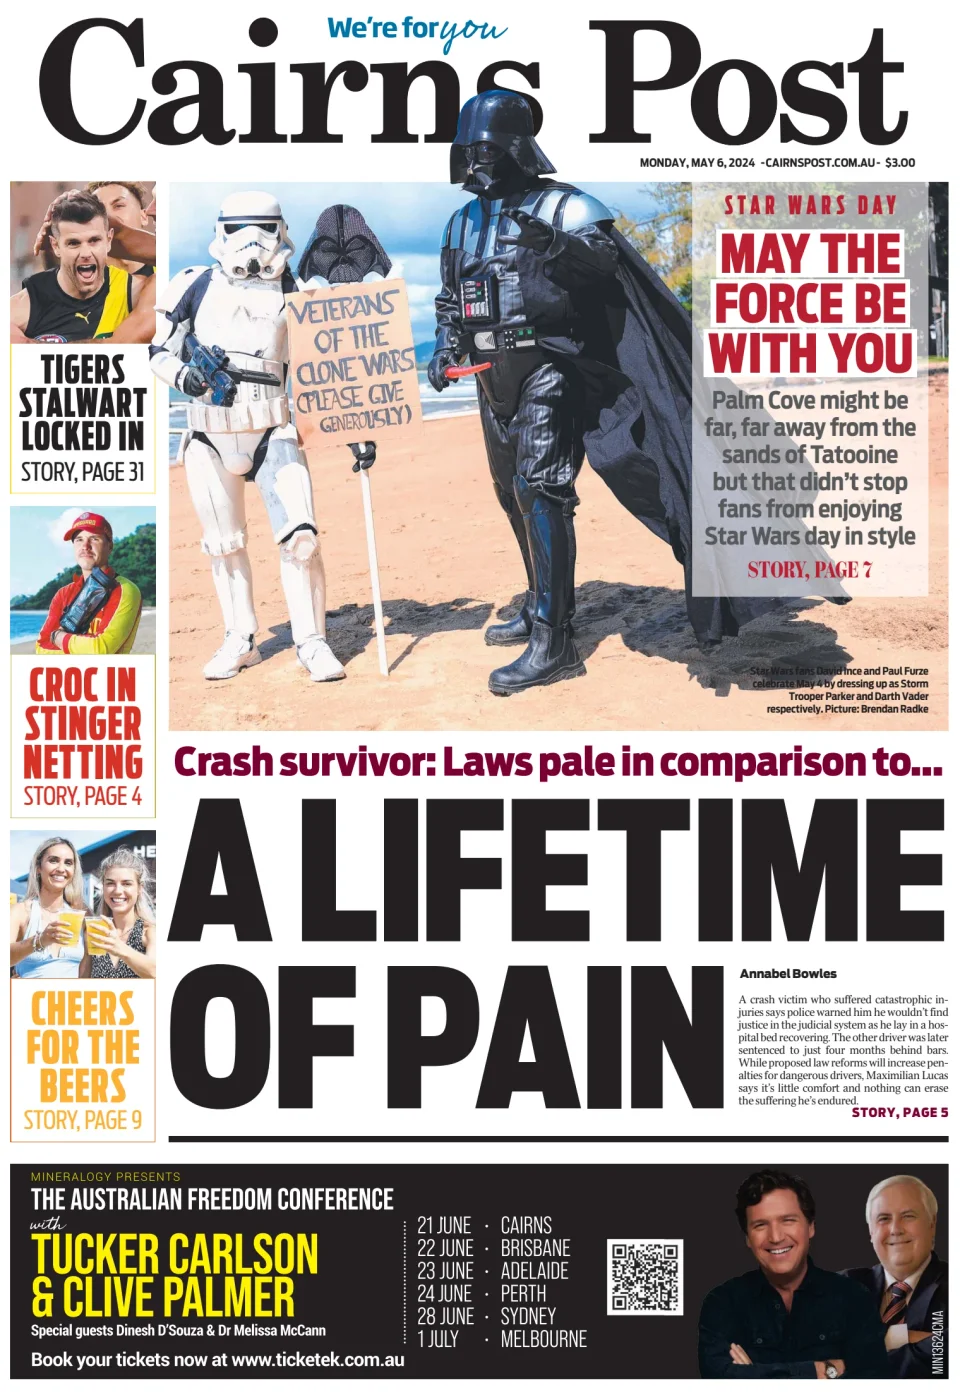 The Cairns Post